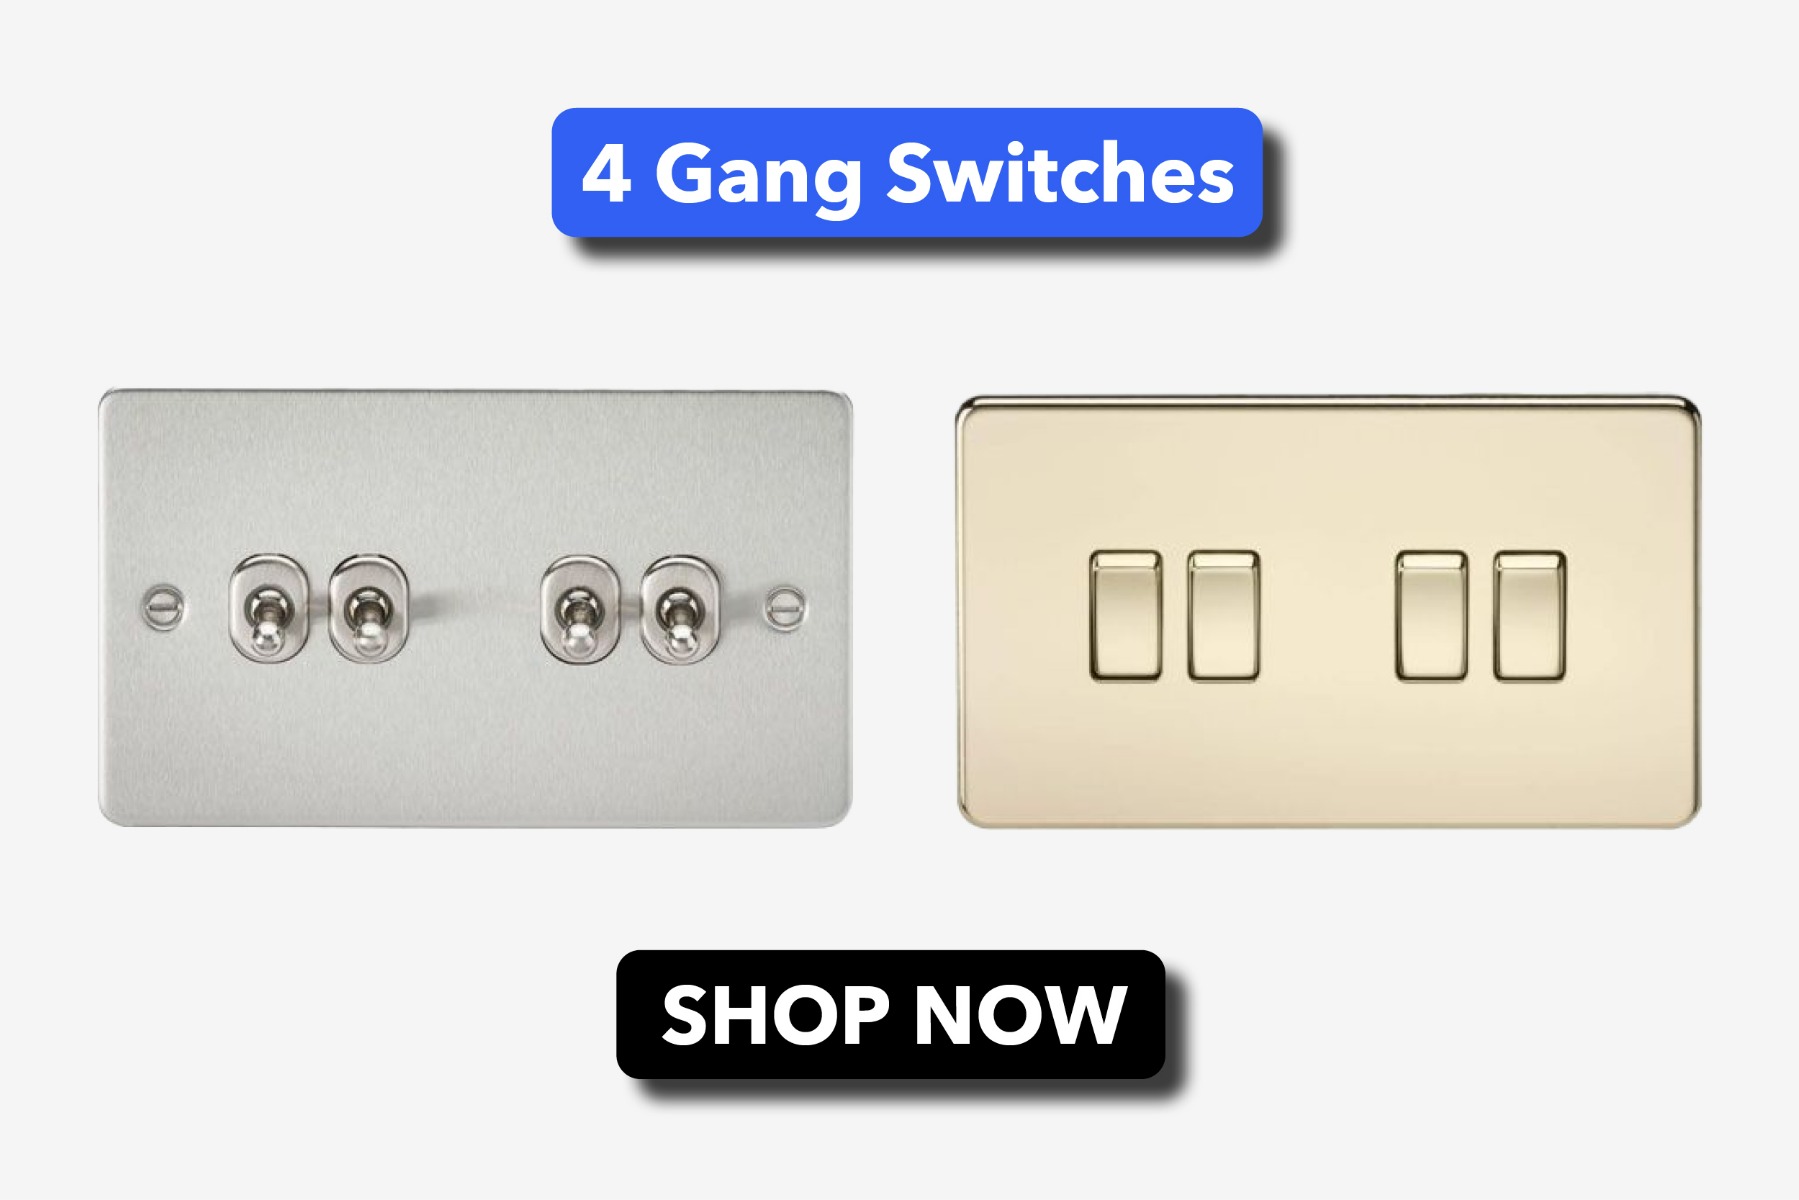 4 gang light switches